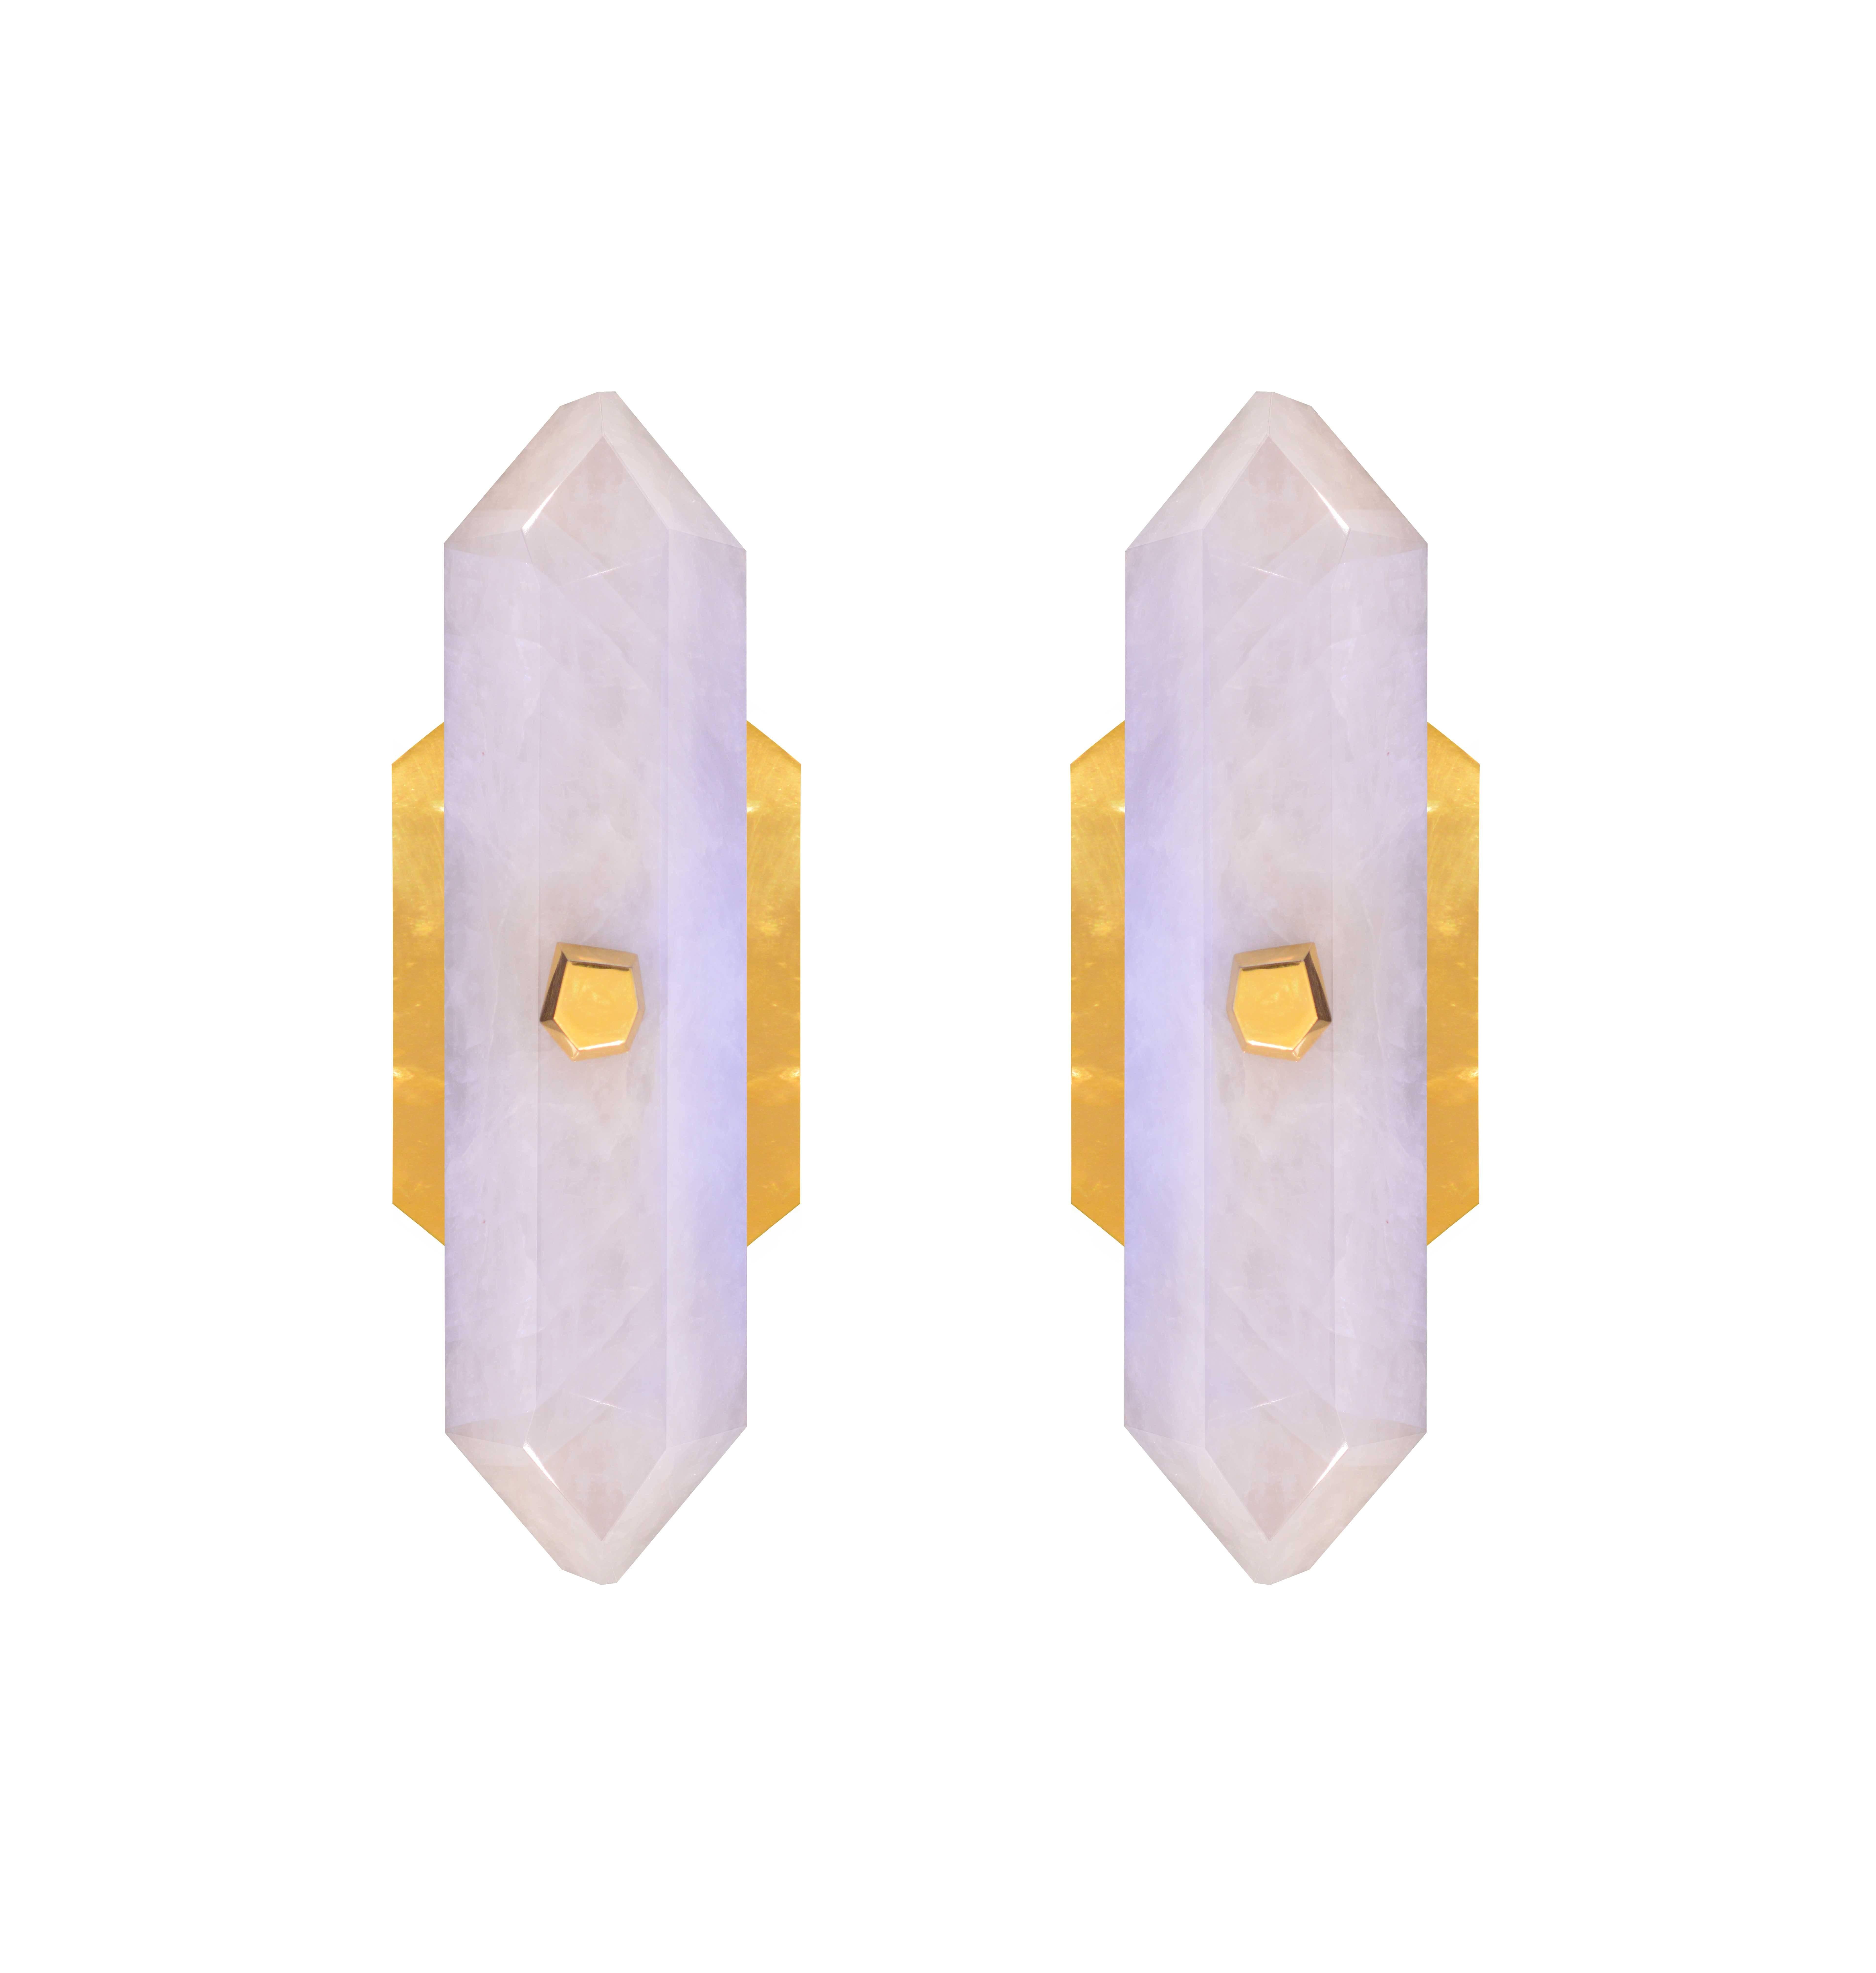 Pair of Diamond Form Rock Crystal Quartz Wall Sconces In Excellent Condition For Sale In New York, NY